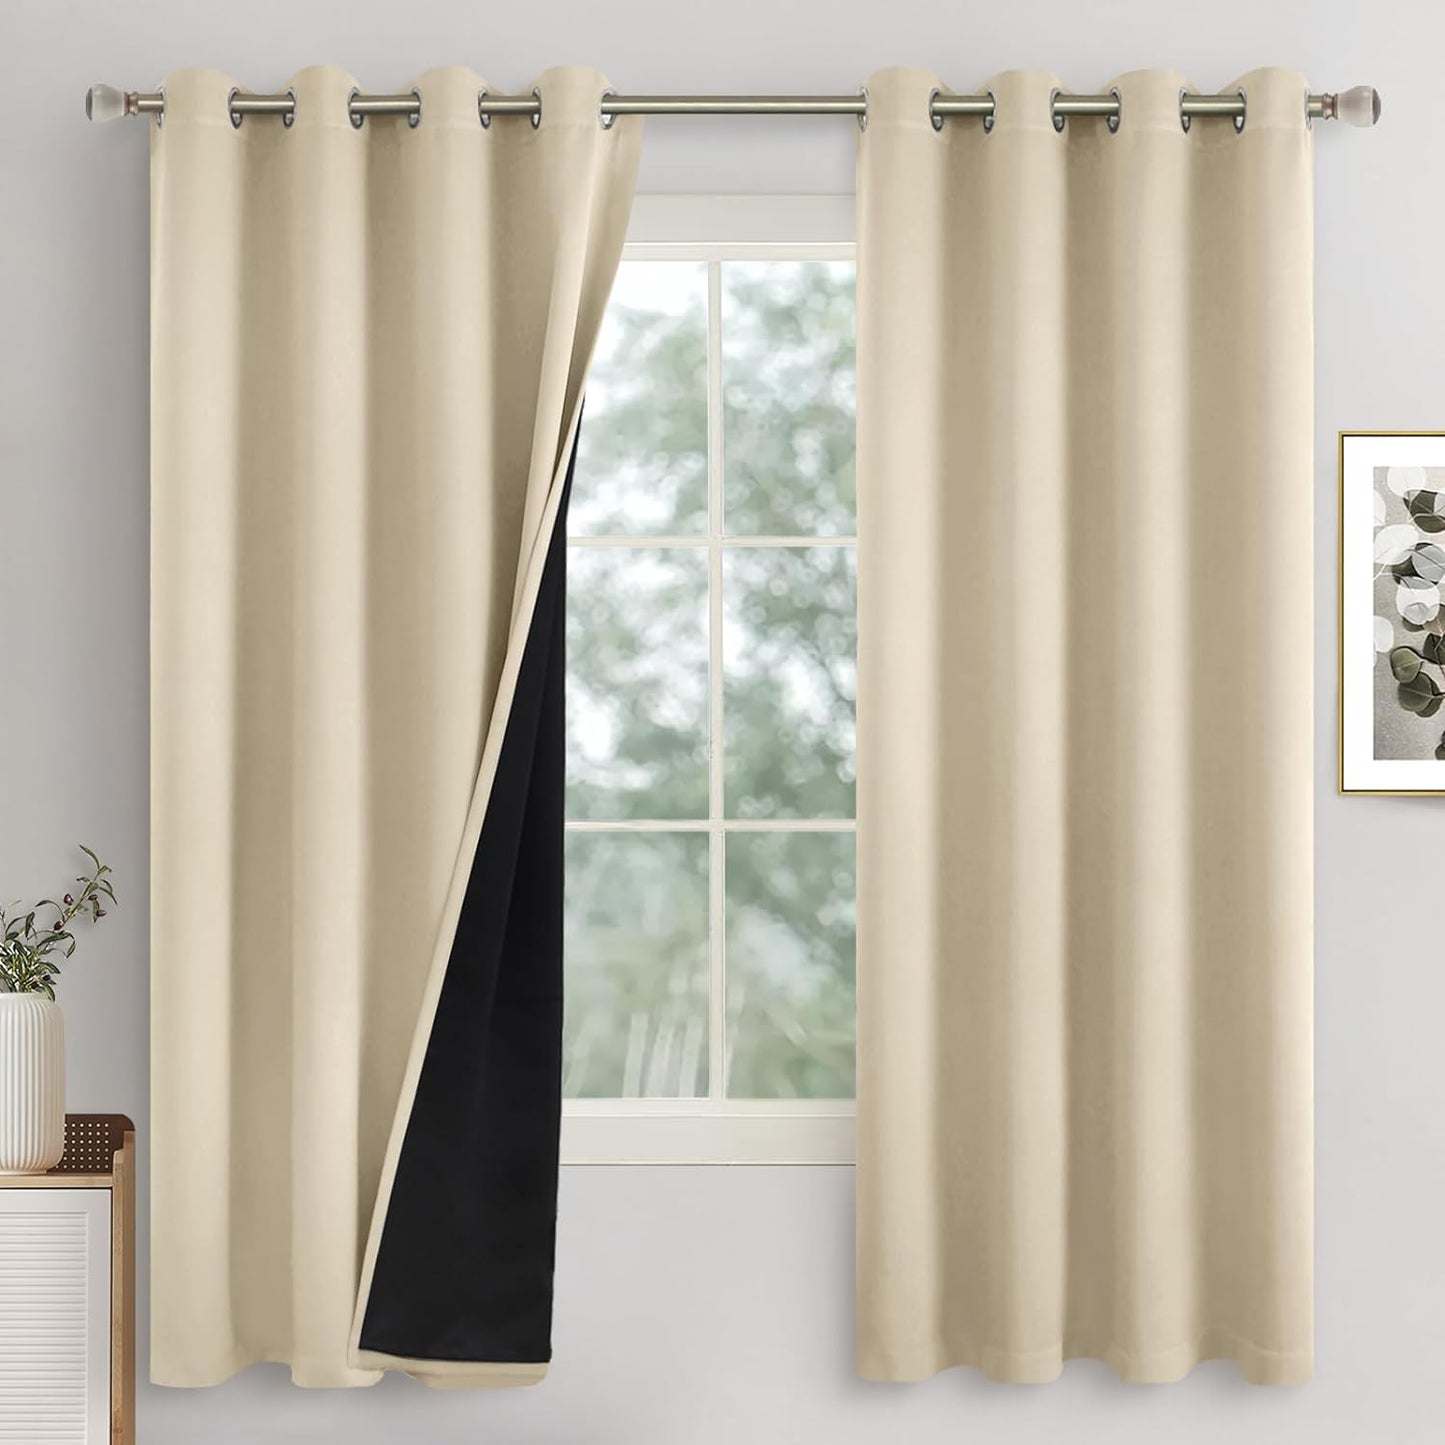 QUEMAS Short Blackout Curtains 54 Inch Length 2 Panels, 100% Light Blocking Thermal Insulated Soundproof Grommet Small Window Curtains for Bedroom Basement with Black Liner, Each 42 Inch Wide, White  QUEMAS Beige + Black Lining W52 X L63 